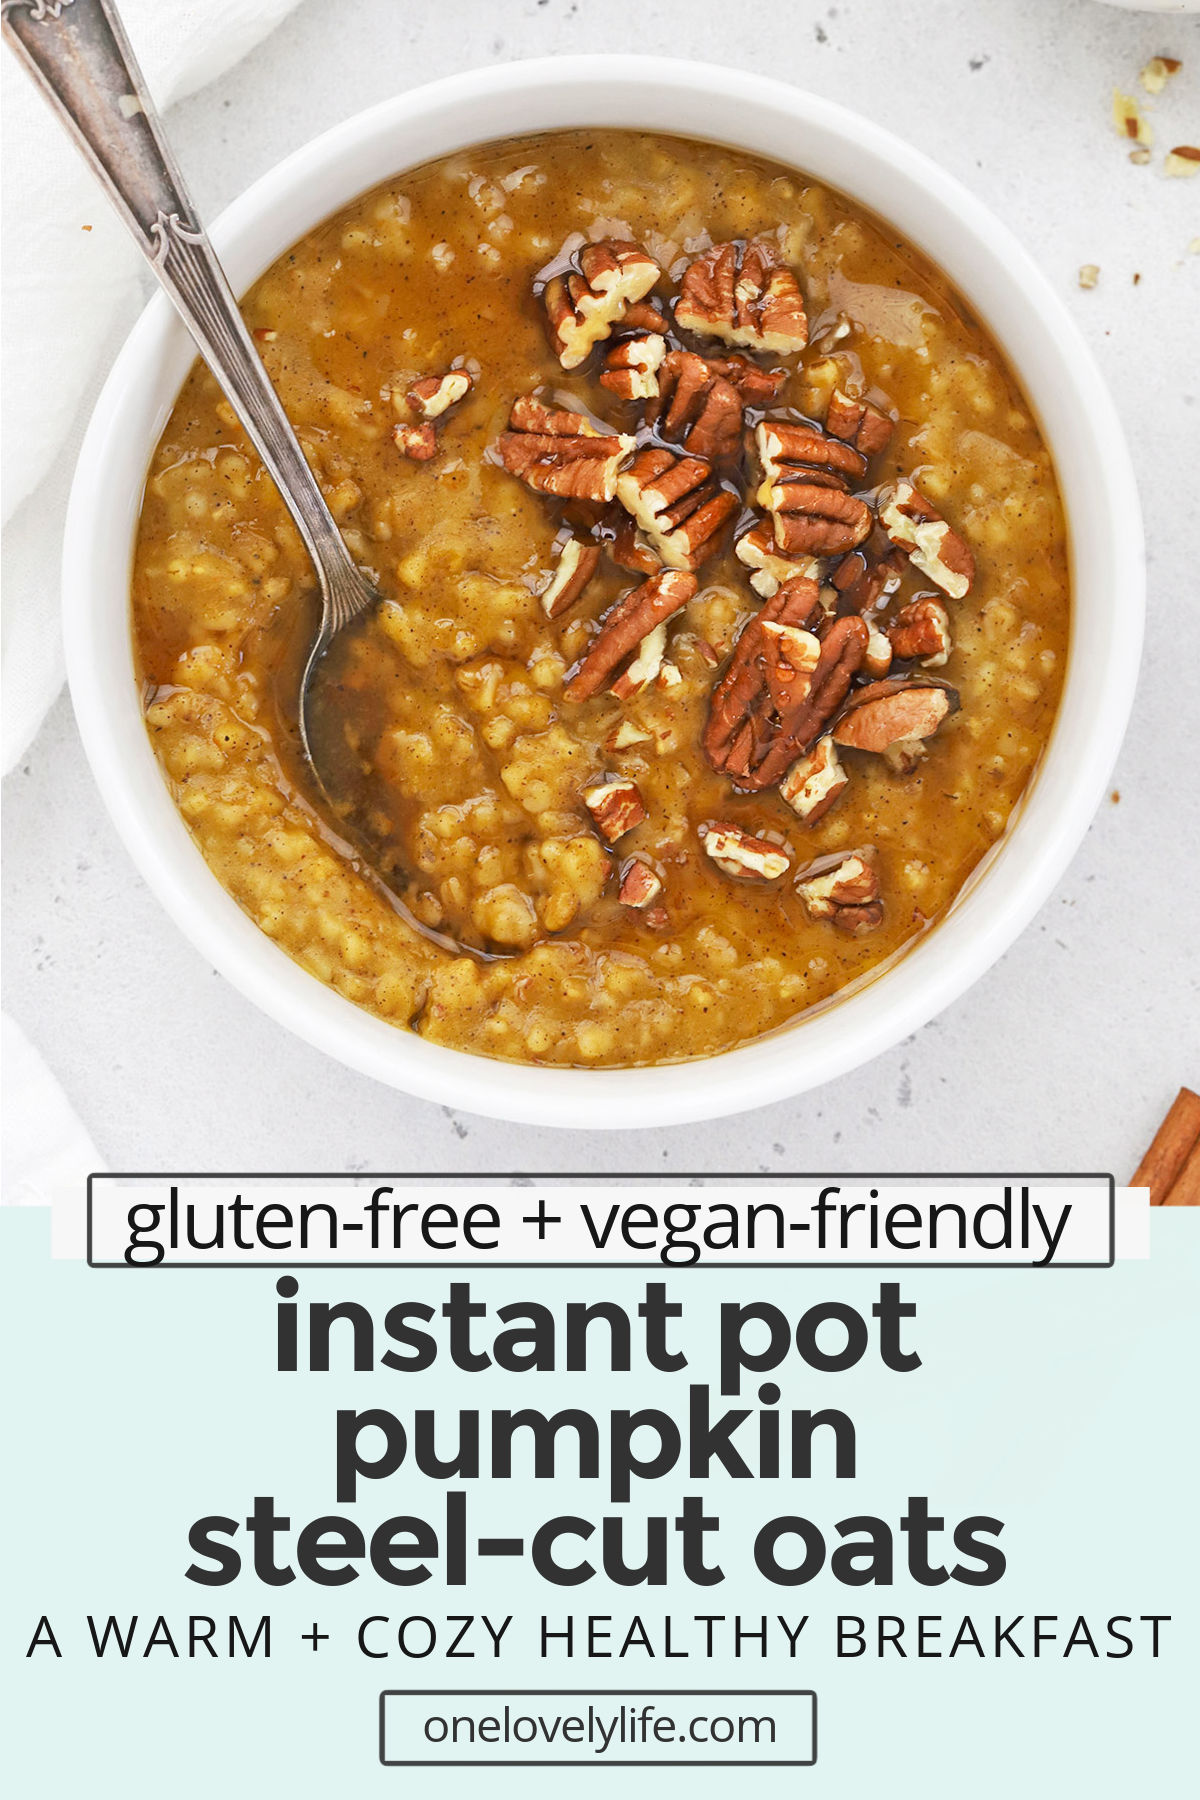 Instant Pot Pumpkin Steel-Cut Oats - This creamy pumpkin steel-cut oatmeal is so easy to make in the Instant Pot. It's a delicious warm breakfast that's worth waking up for any day of the week. (Gluten-Free, Vegan-Friendly) // Pumpkin Oatmeal // Pumpkin Steel Cut Oats // Instant Pot Pumpkin Oatmeal // Fall breakfast // Winter breakfast // healthy breakfast #steelcutoats #oatmeal #instantpot #fallrecipe #pumpkin #healthypumpkinrecipes #veganbreakfast #healthybreakfast